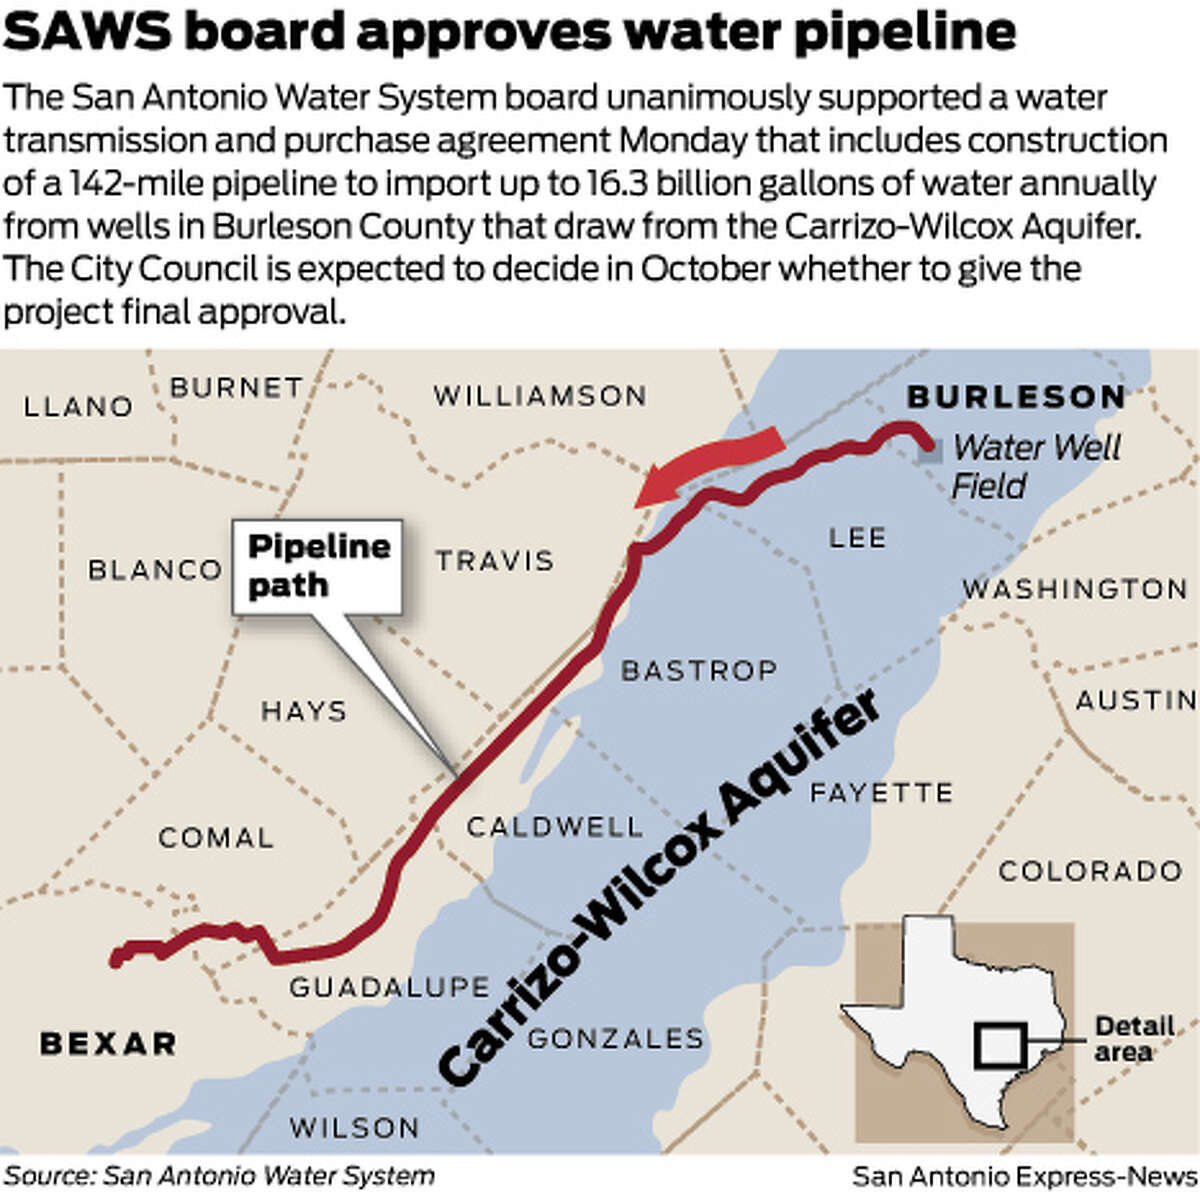 The San Antonio Water System board unanimously supported a water transmission and purchase agreement Monday that includes construction of a 142-mile pipeline to import up to 16.3 billion gallons of water annually from wells in Burleson County that draw from the Carrizo-Wilcox Aquifer. The City Council is expected to decide in October whether to give the project final approval.